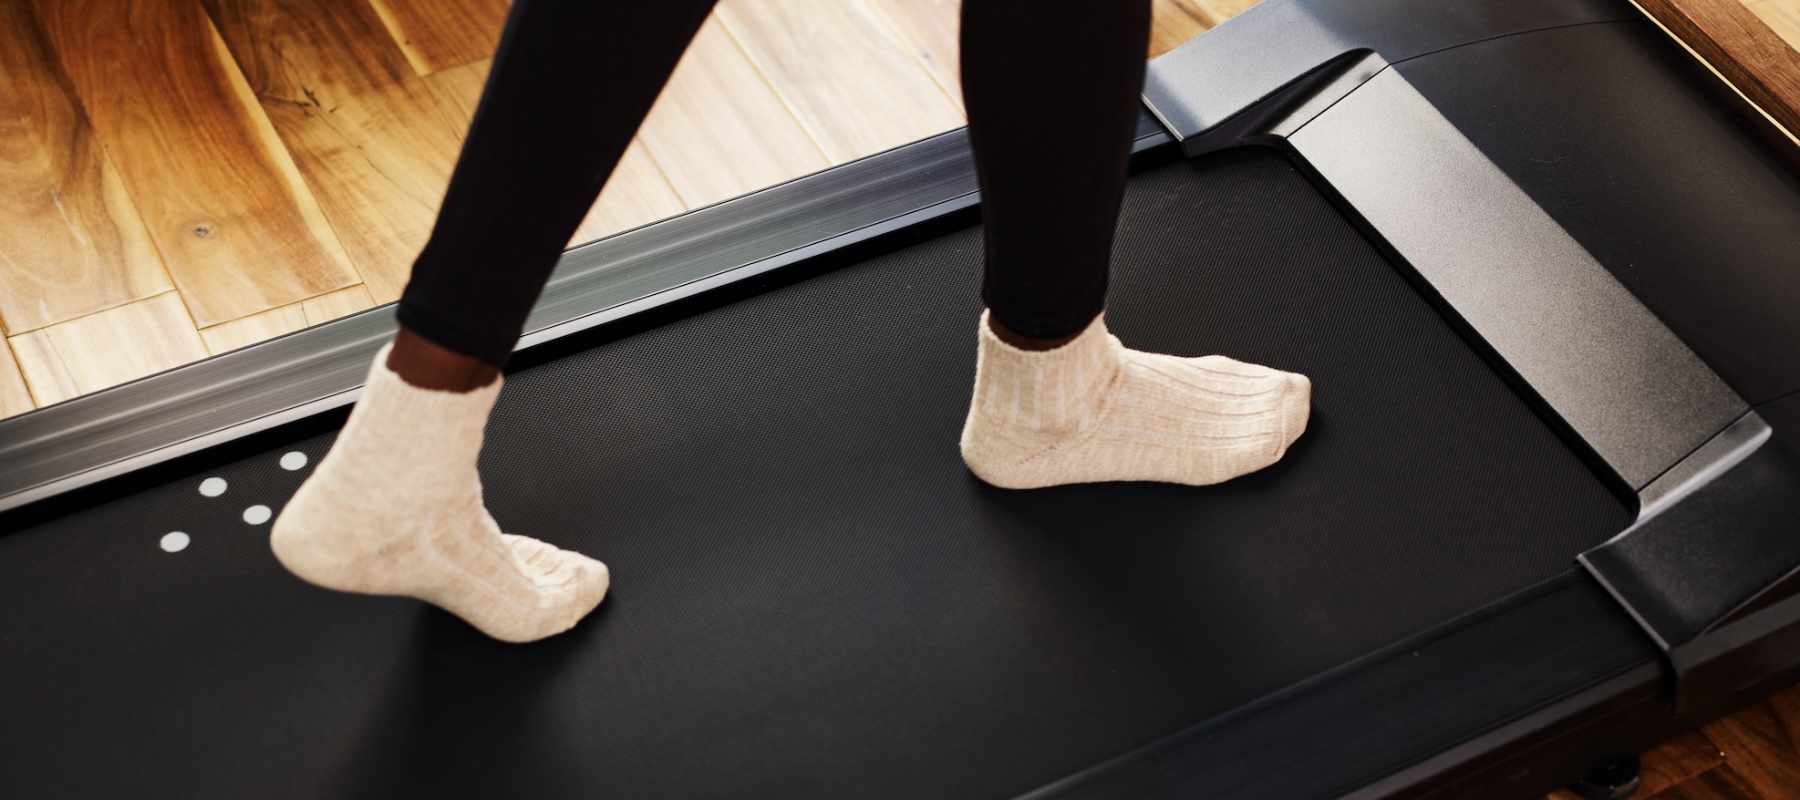 Video explaining how an under desk treadmill will change your work life